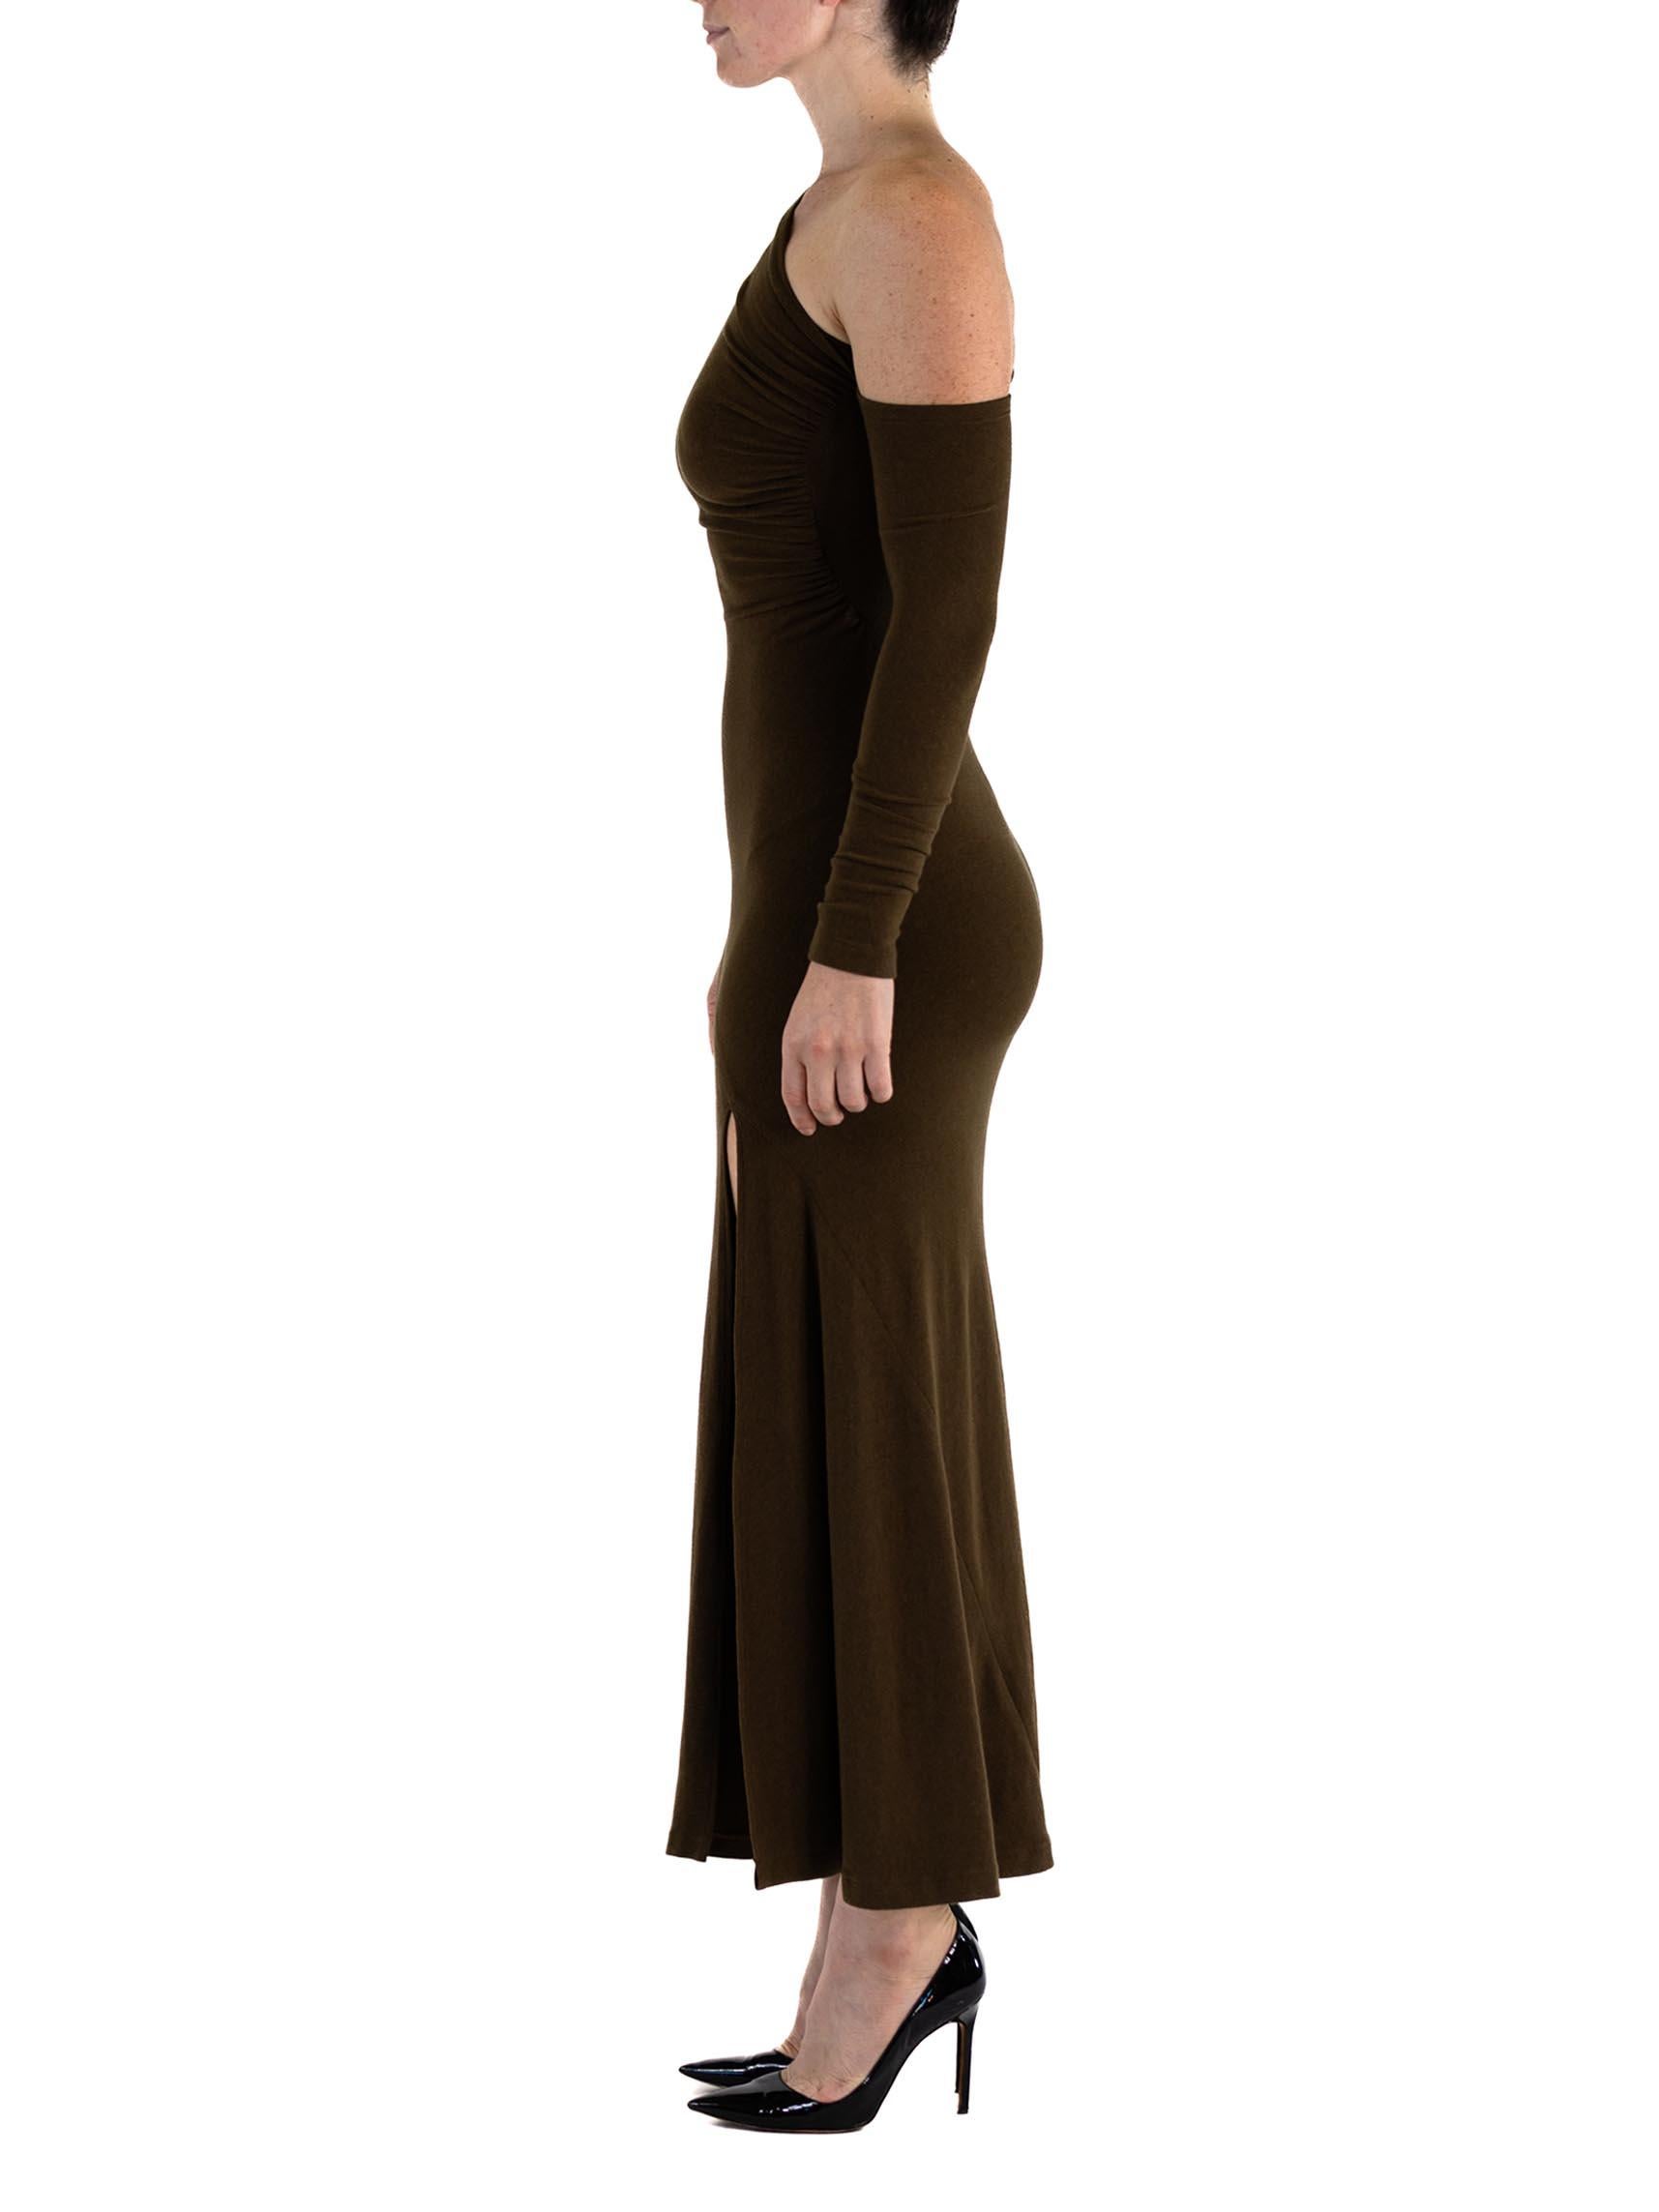 1990S DONNA KARAN Brown Rayon Blend Jersey Assymtetrical Neckline Ruched Gown With Slit